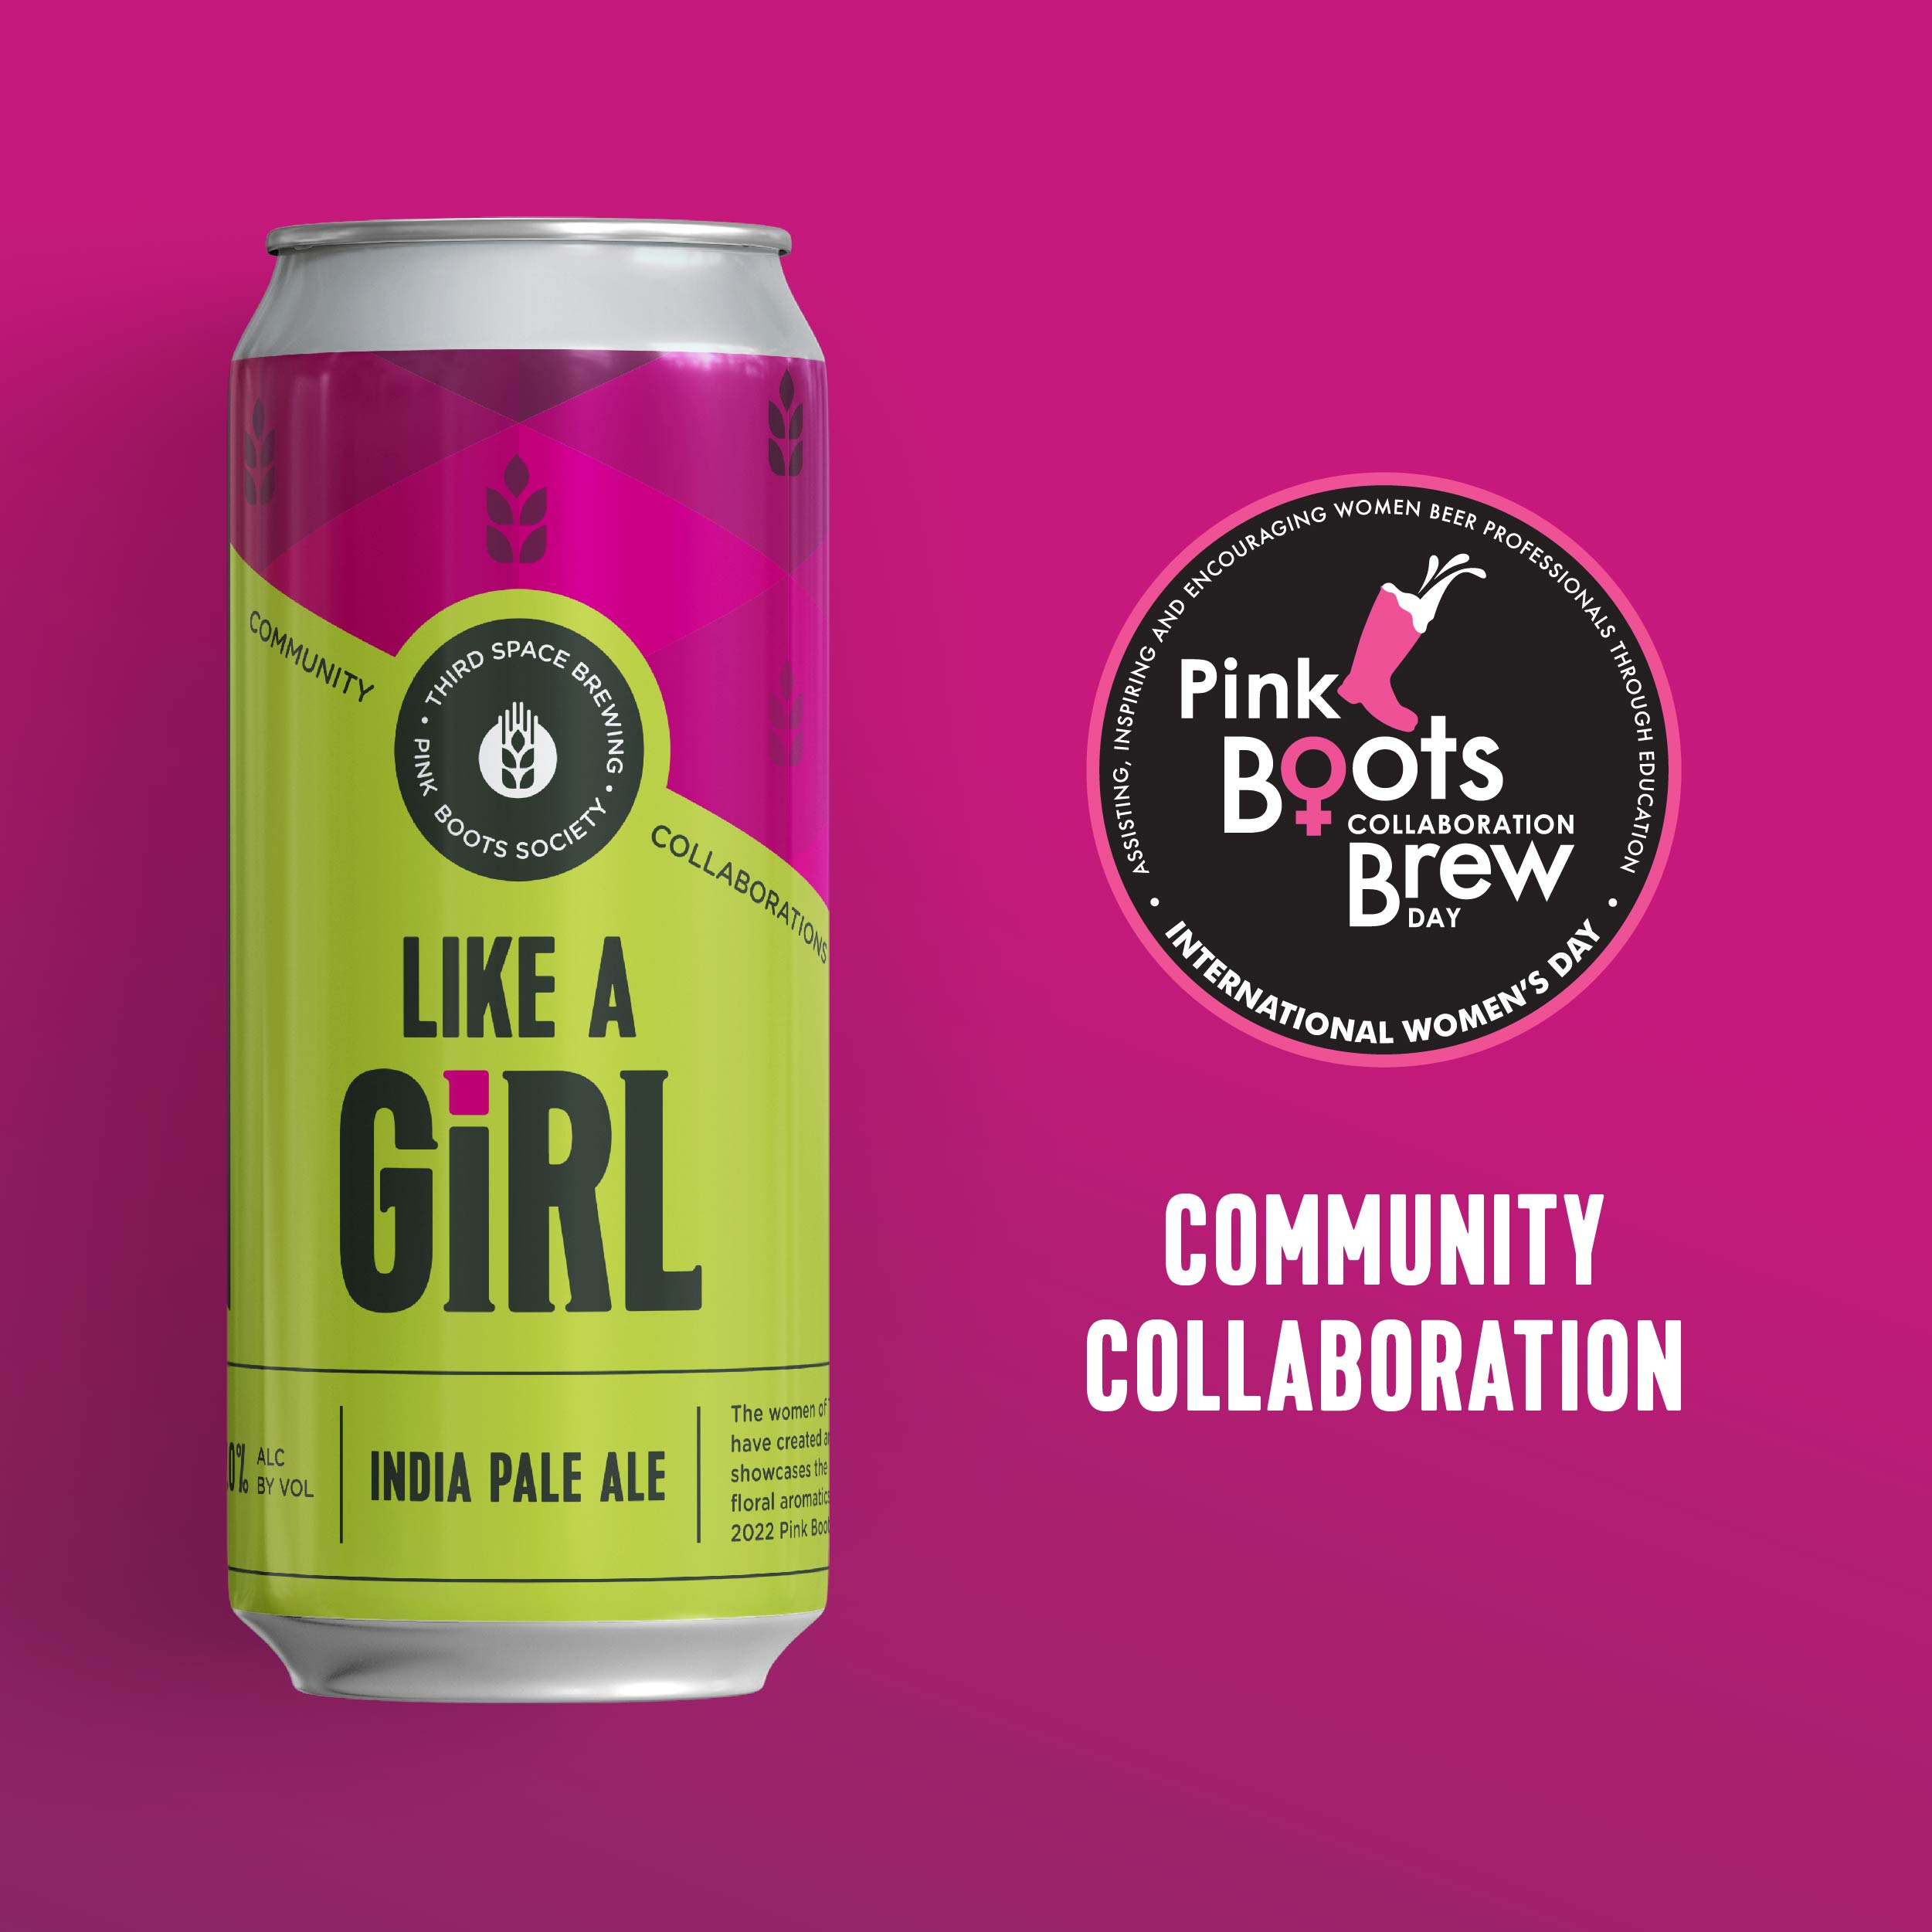 “Like a Girl” IPA Brewed Exclusively by Women, Debuts at Third Space Brewing on March 8th, International Women’s Day